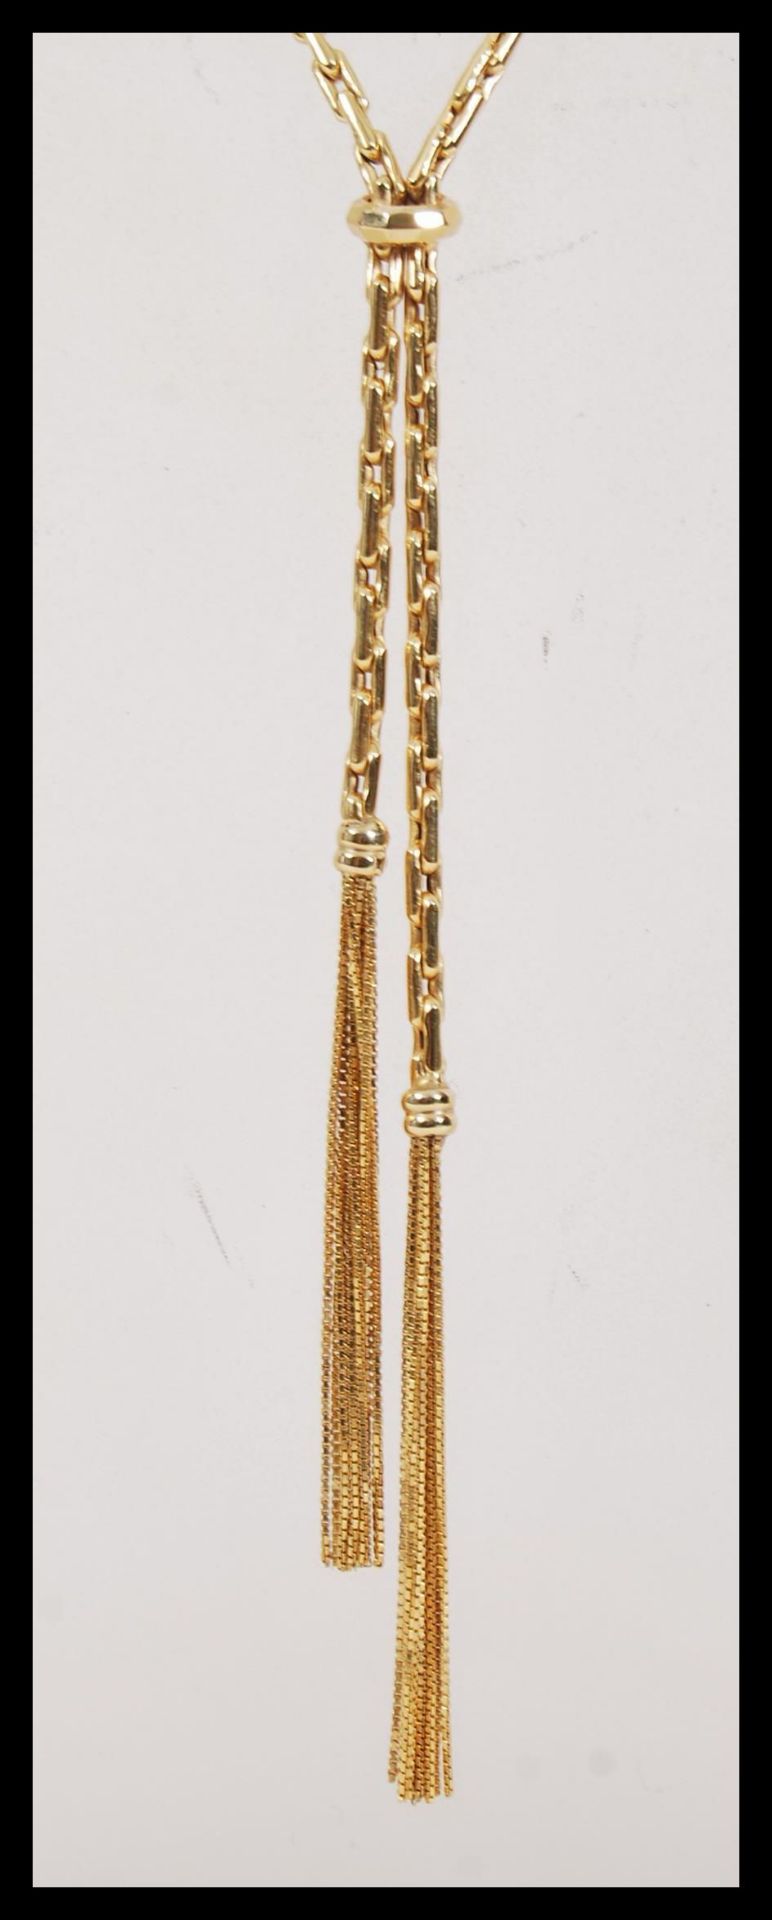 A hallmarked 9ct gold long boxlink necklace chain, having a large bolt ring clasp, with tasseled